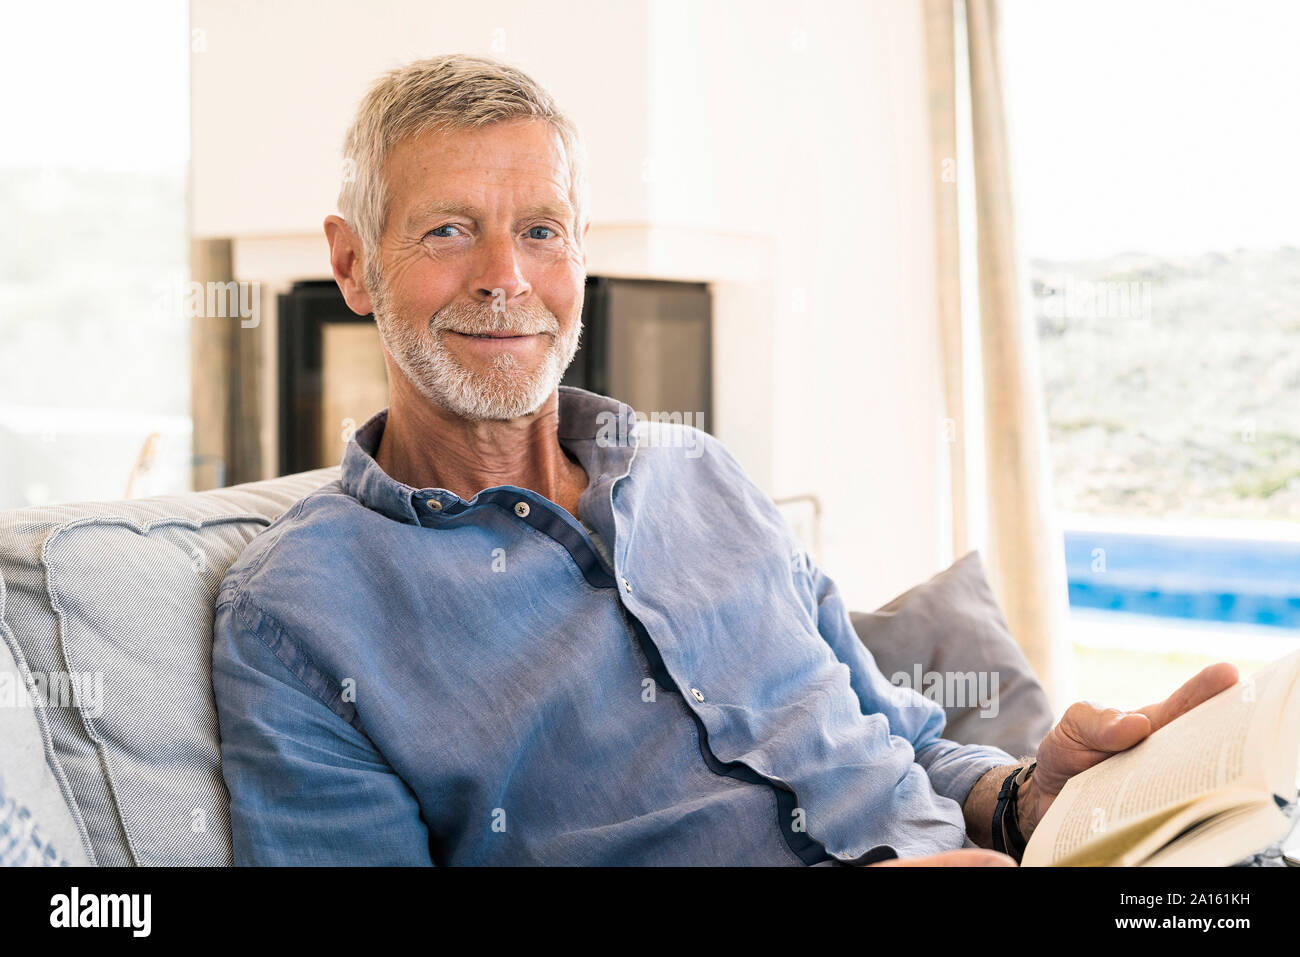 Portrait of smiling senior man reading a book at home Banque D'Images